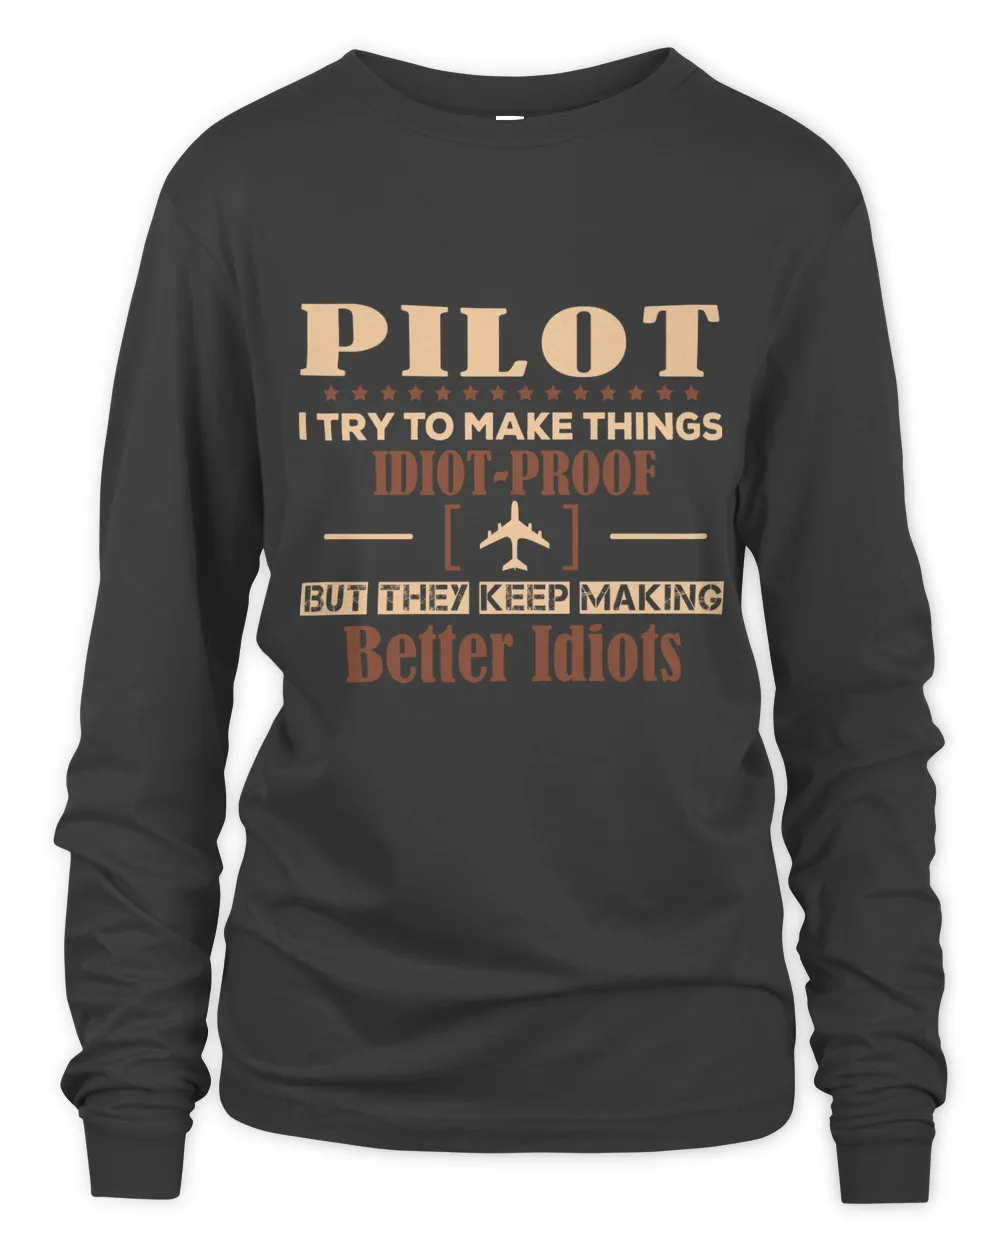 Pilot I try to make things idiot-proof but they keep making better idiots